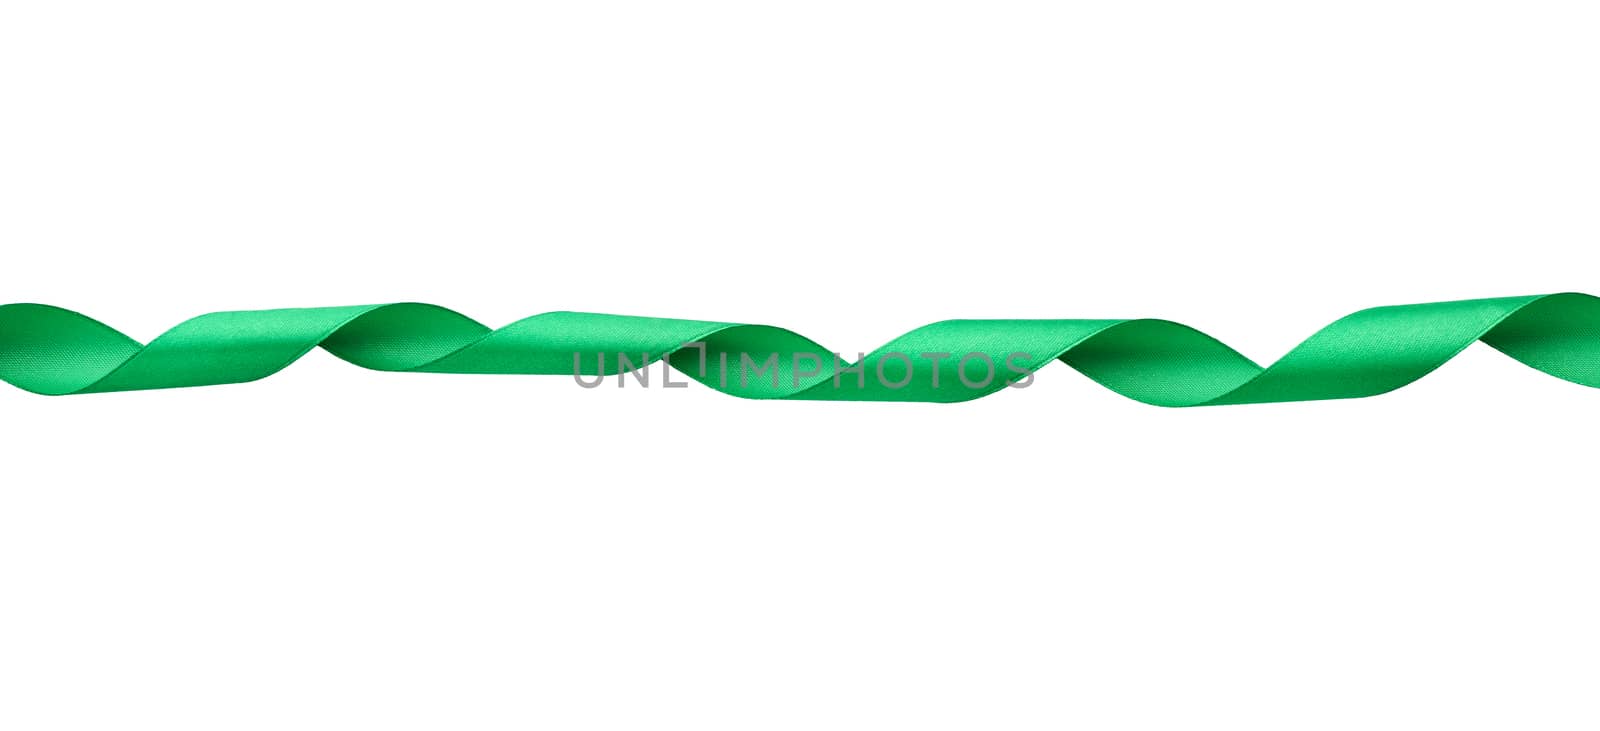 twisted silk green ribbon isolated on white background, decorative element for designer. Festive decoration element. Holiday background.